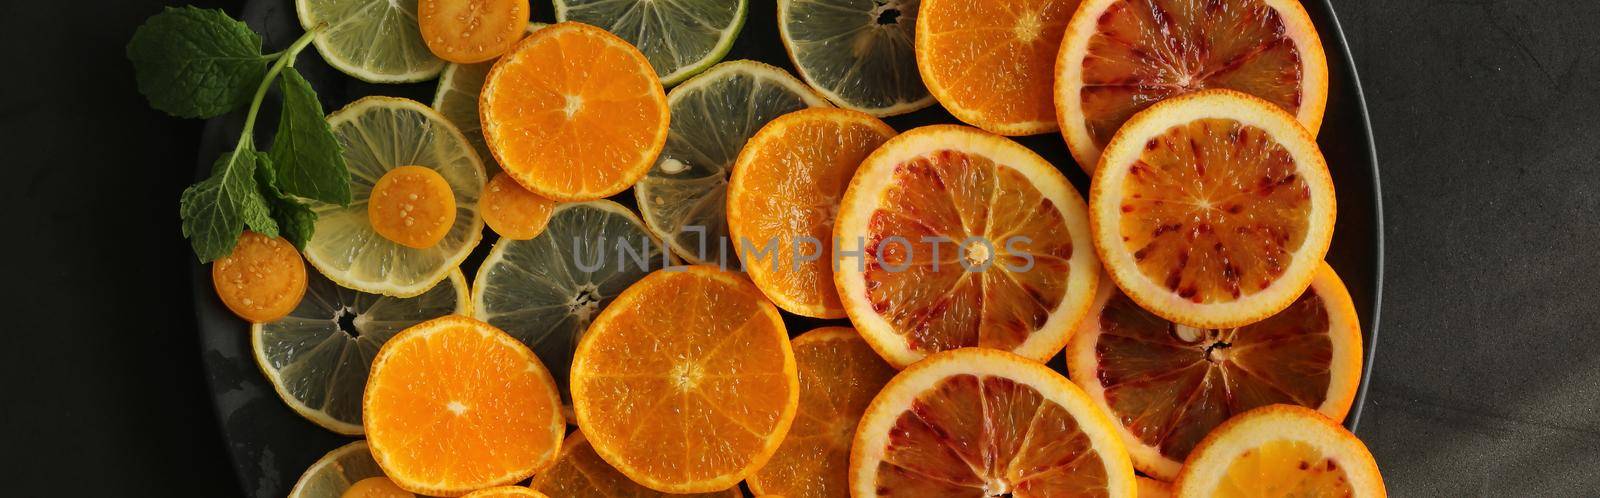 Clices of citrus by NelliPolk